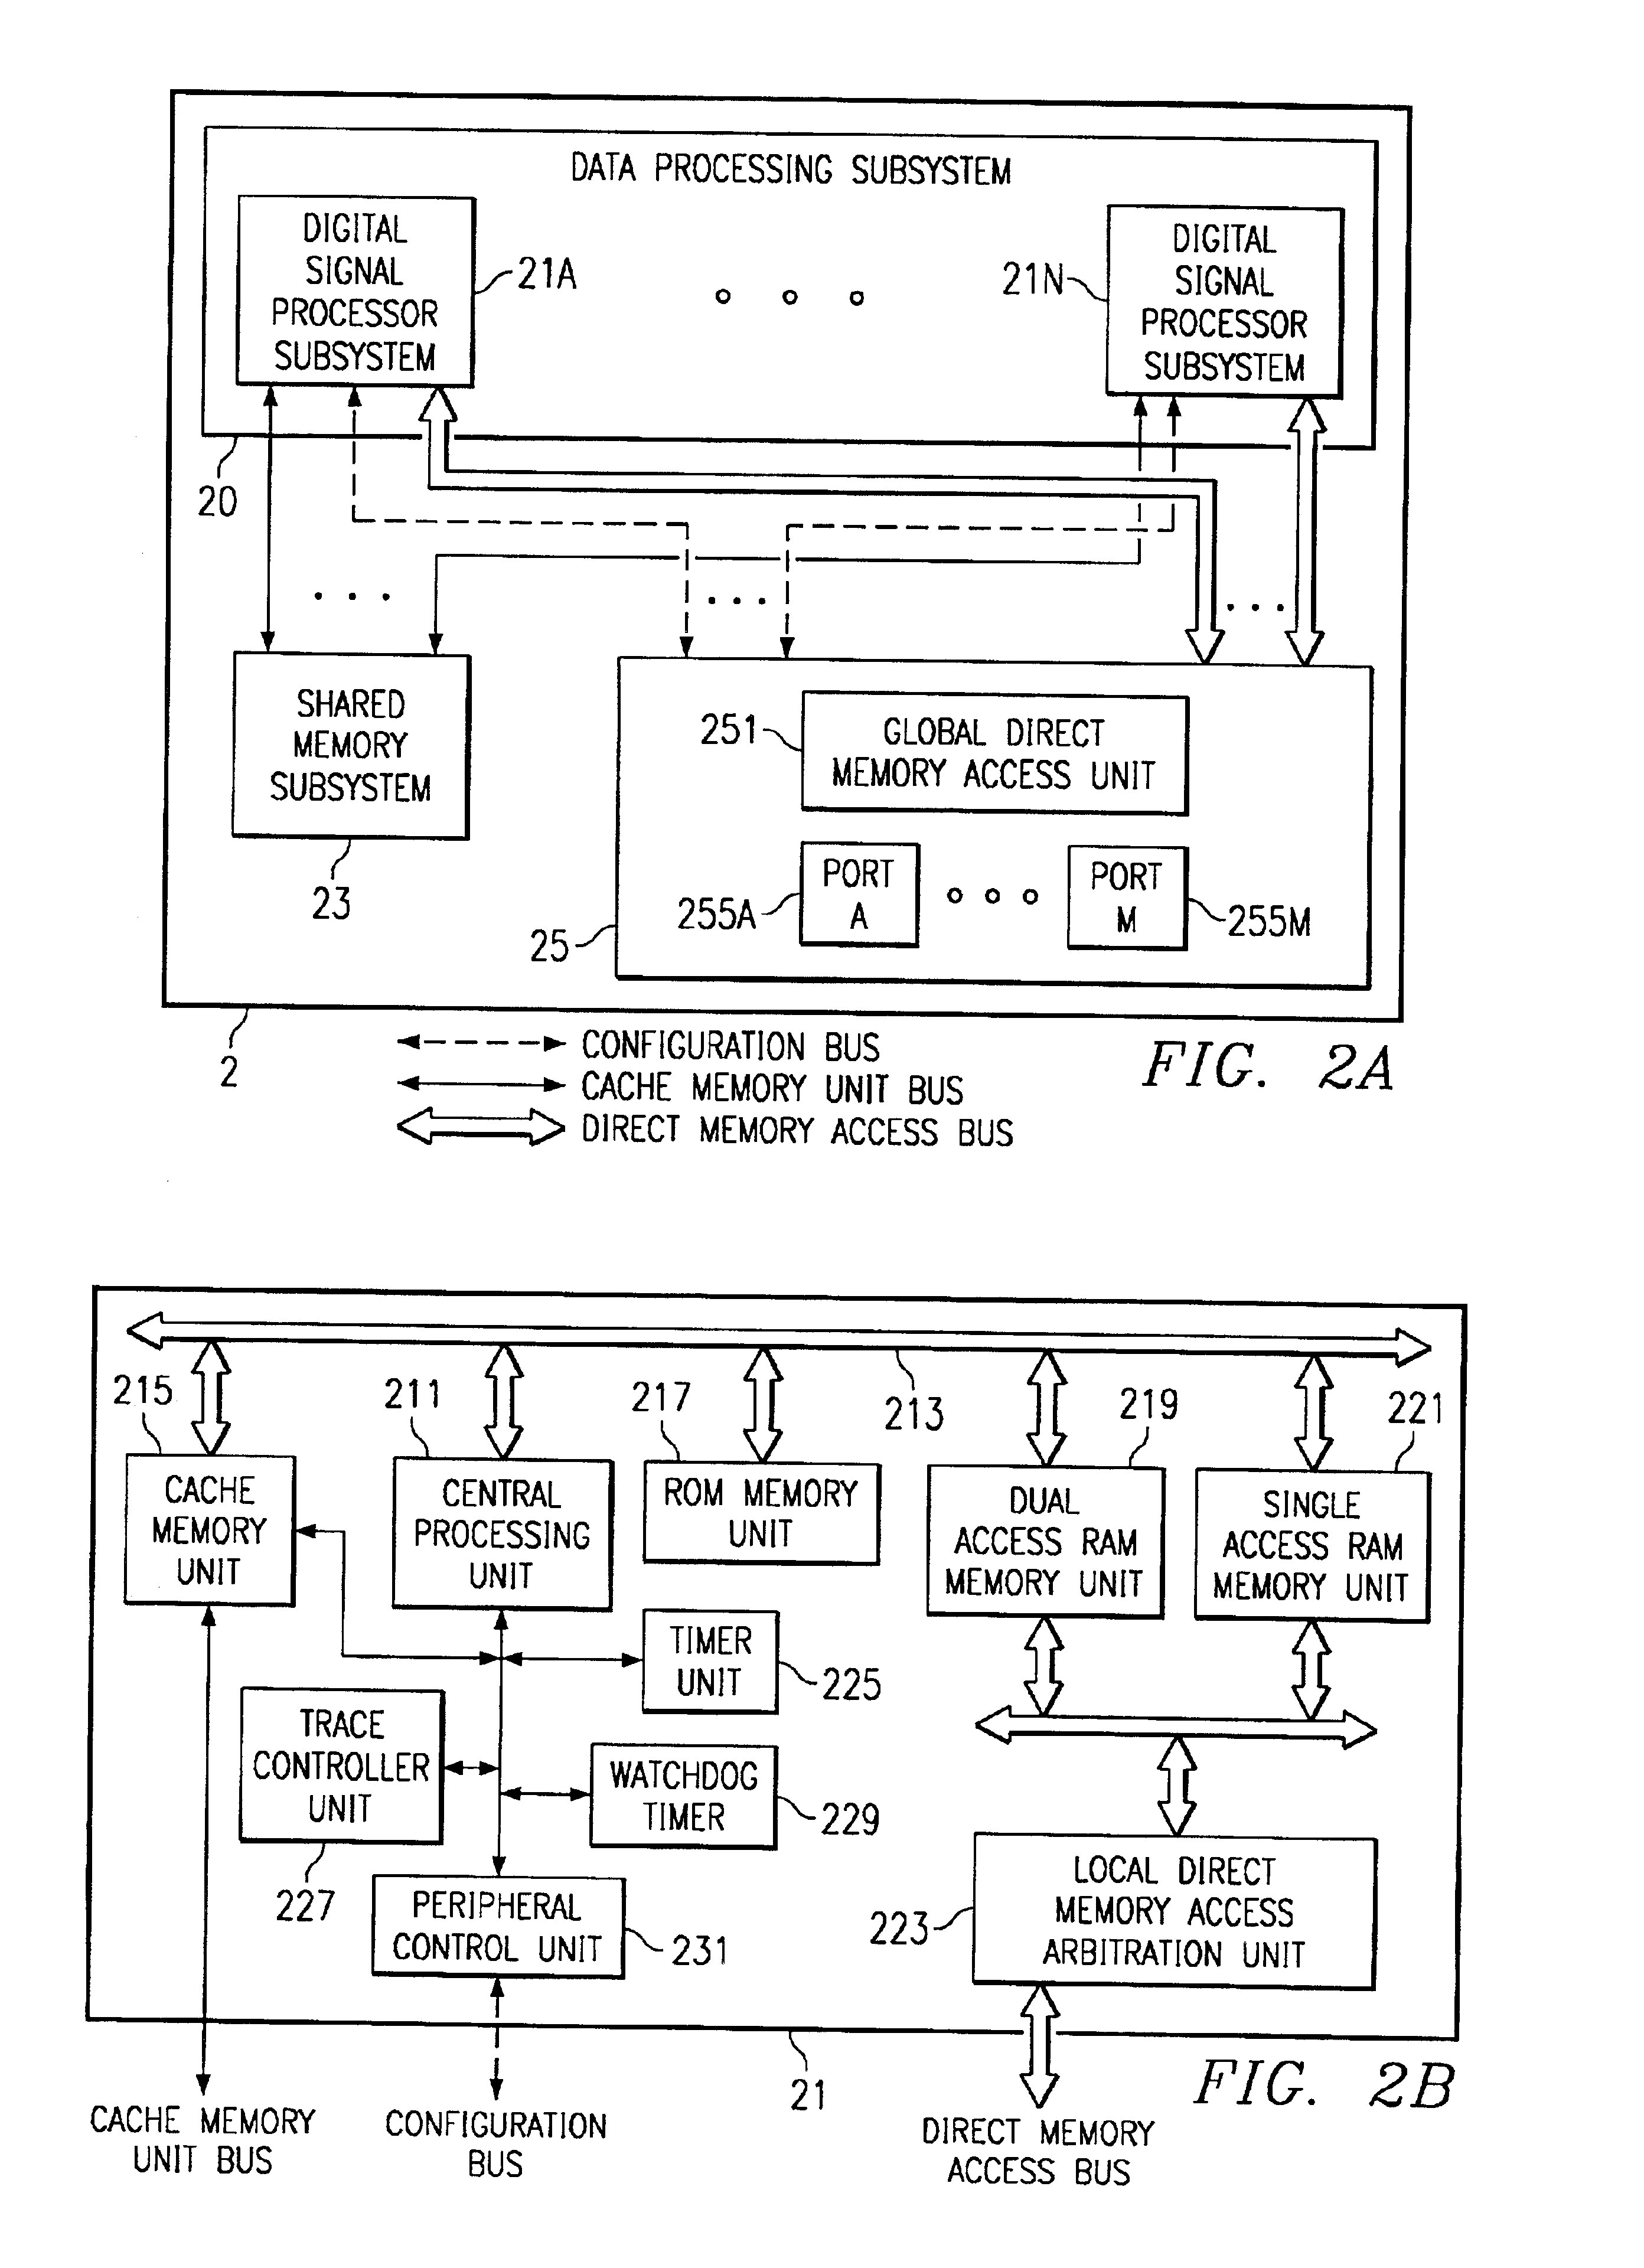 Apparatus and method for distribution of signals from a high level data link controller to multiple digital signal processor cores